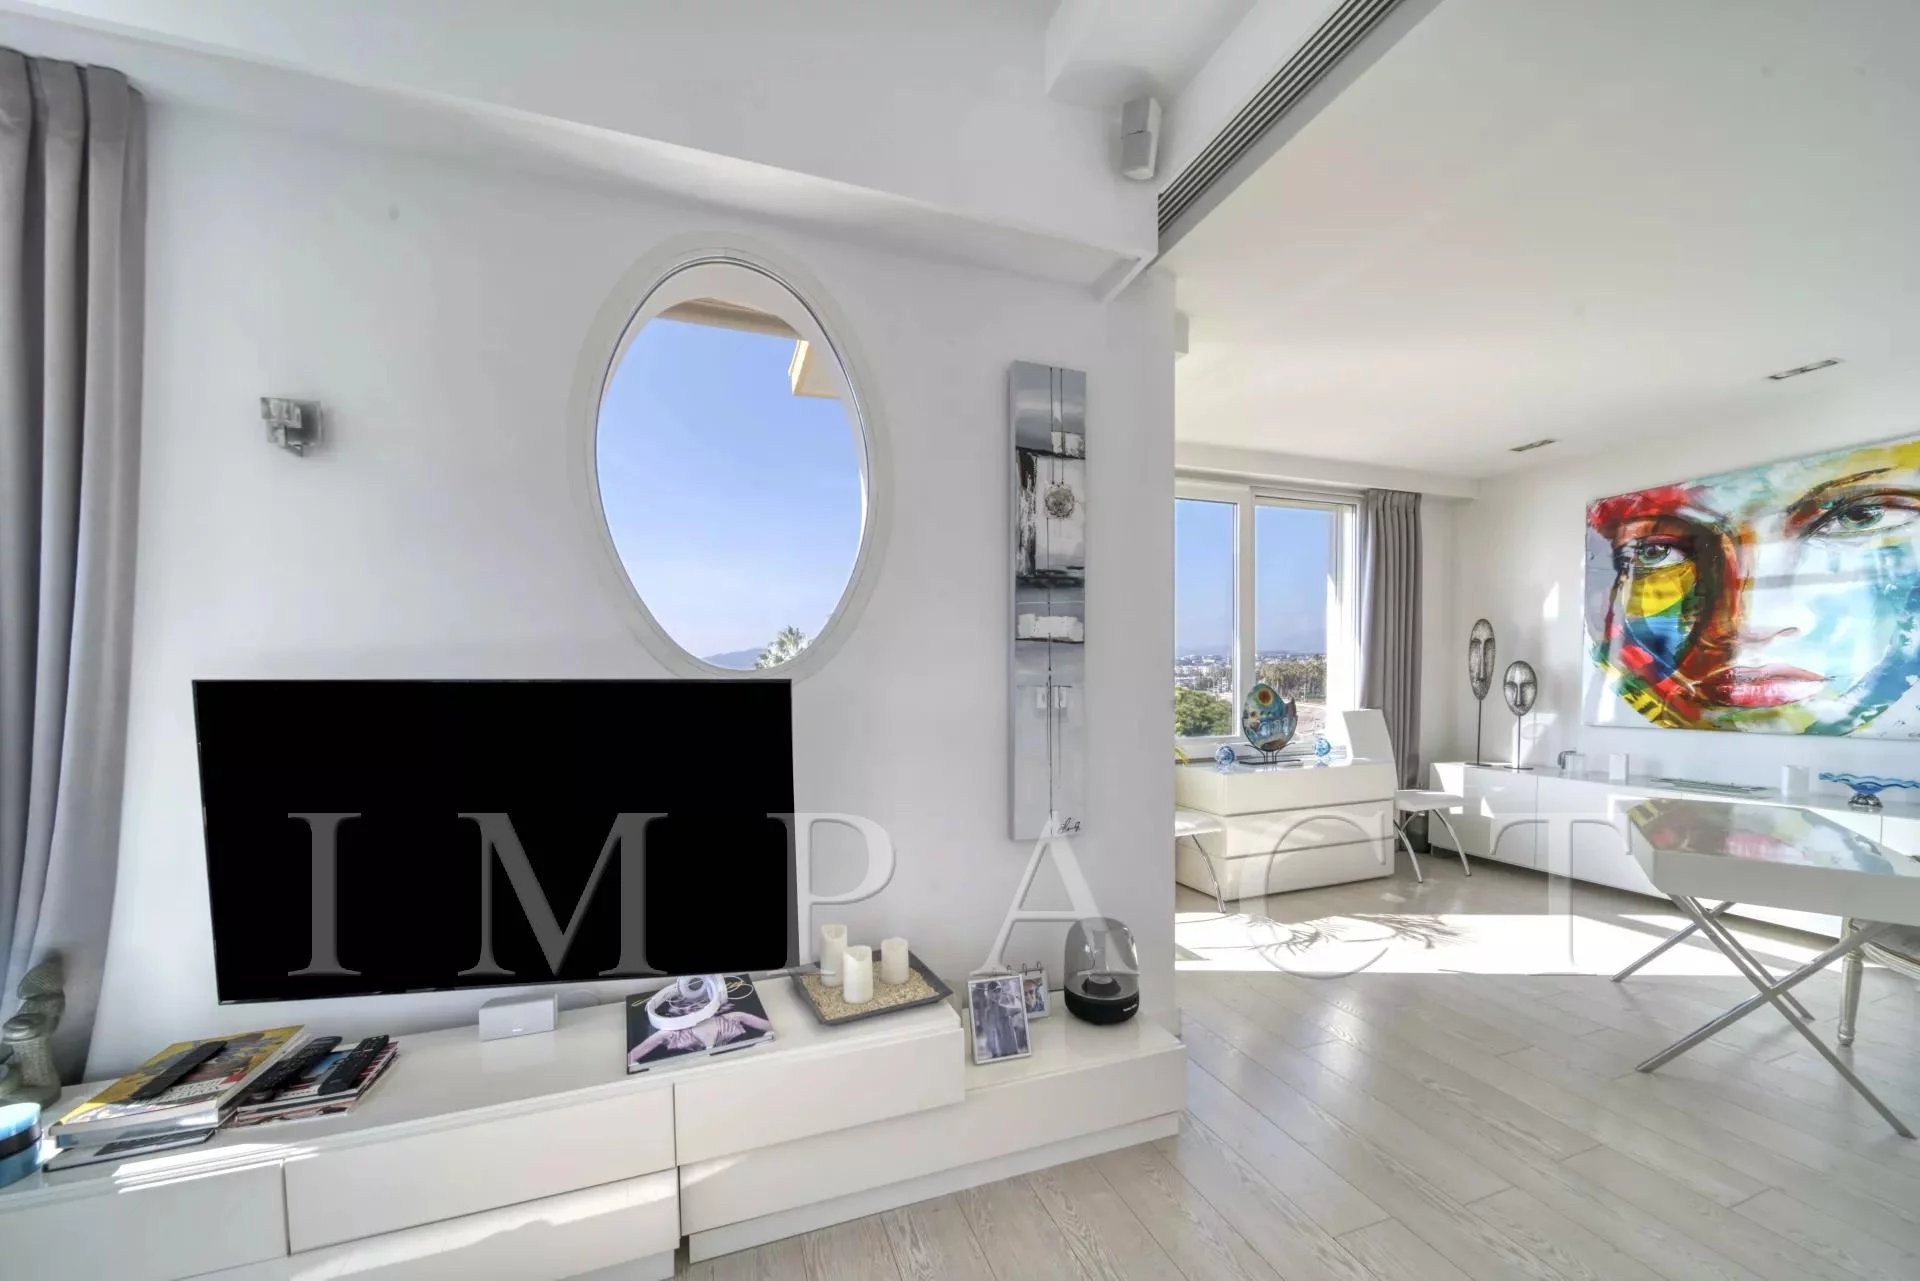 Apartment to rent on the Croisette, Cannes